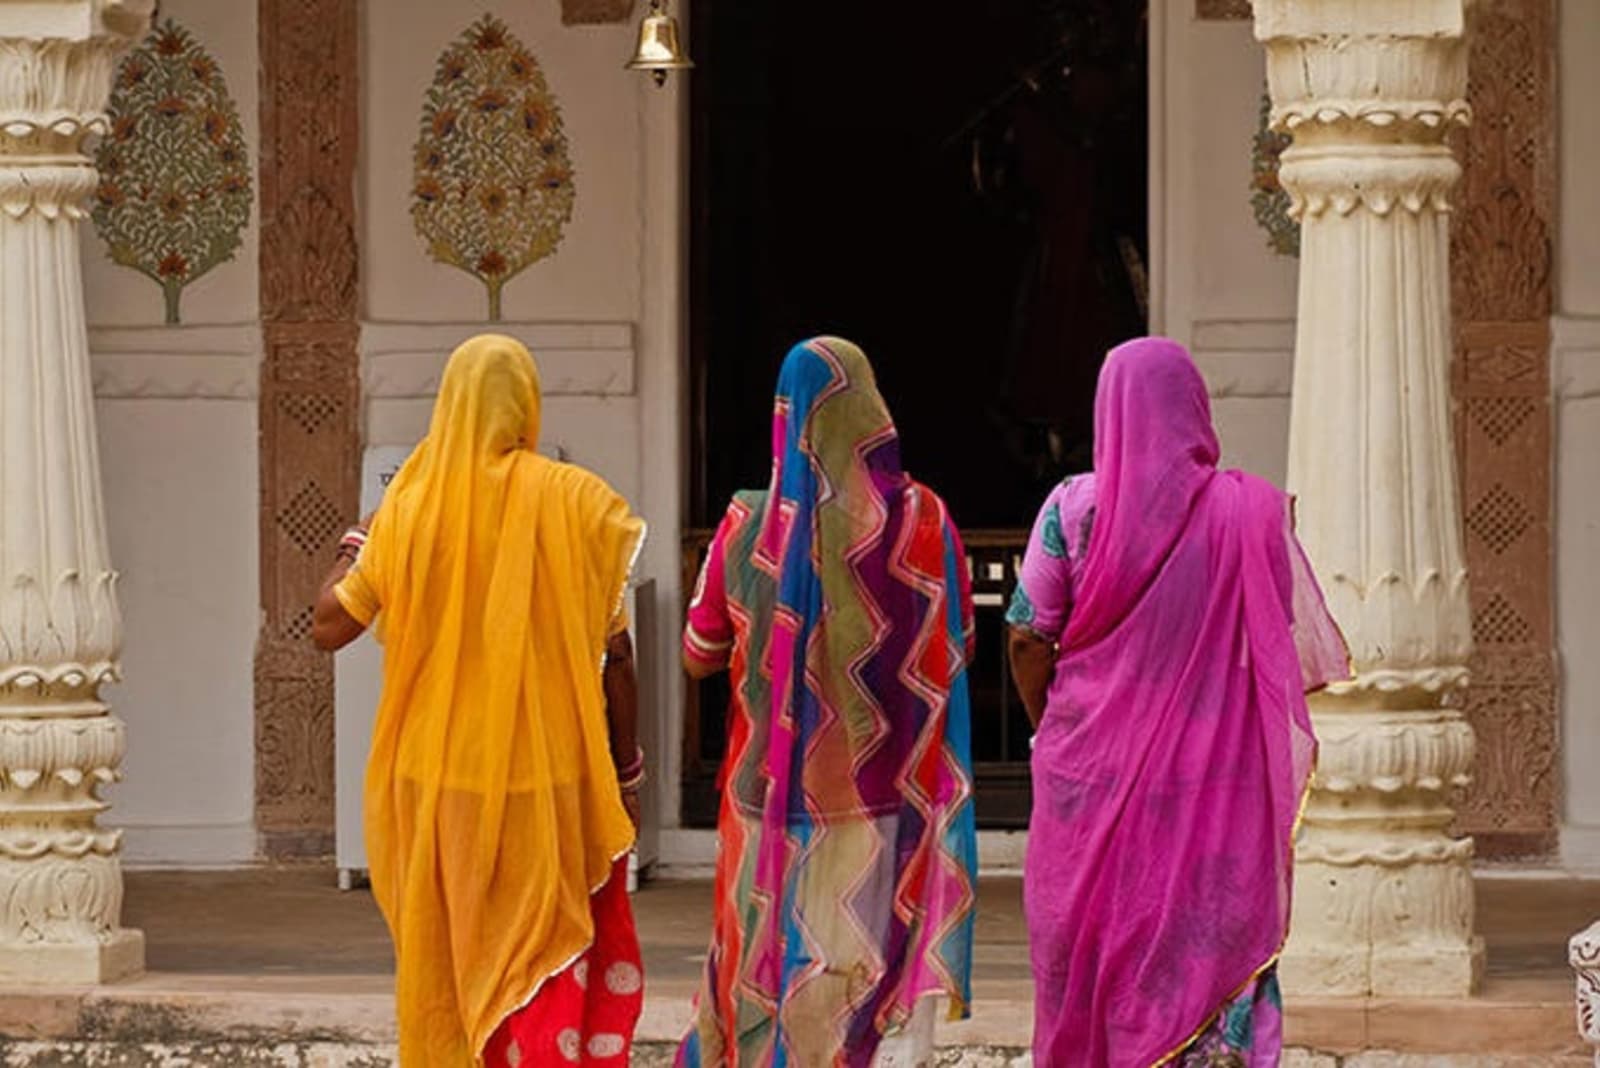 rs-colourful-dresses-india-shutterstock_661892092.jpg